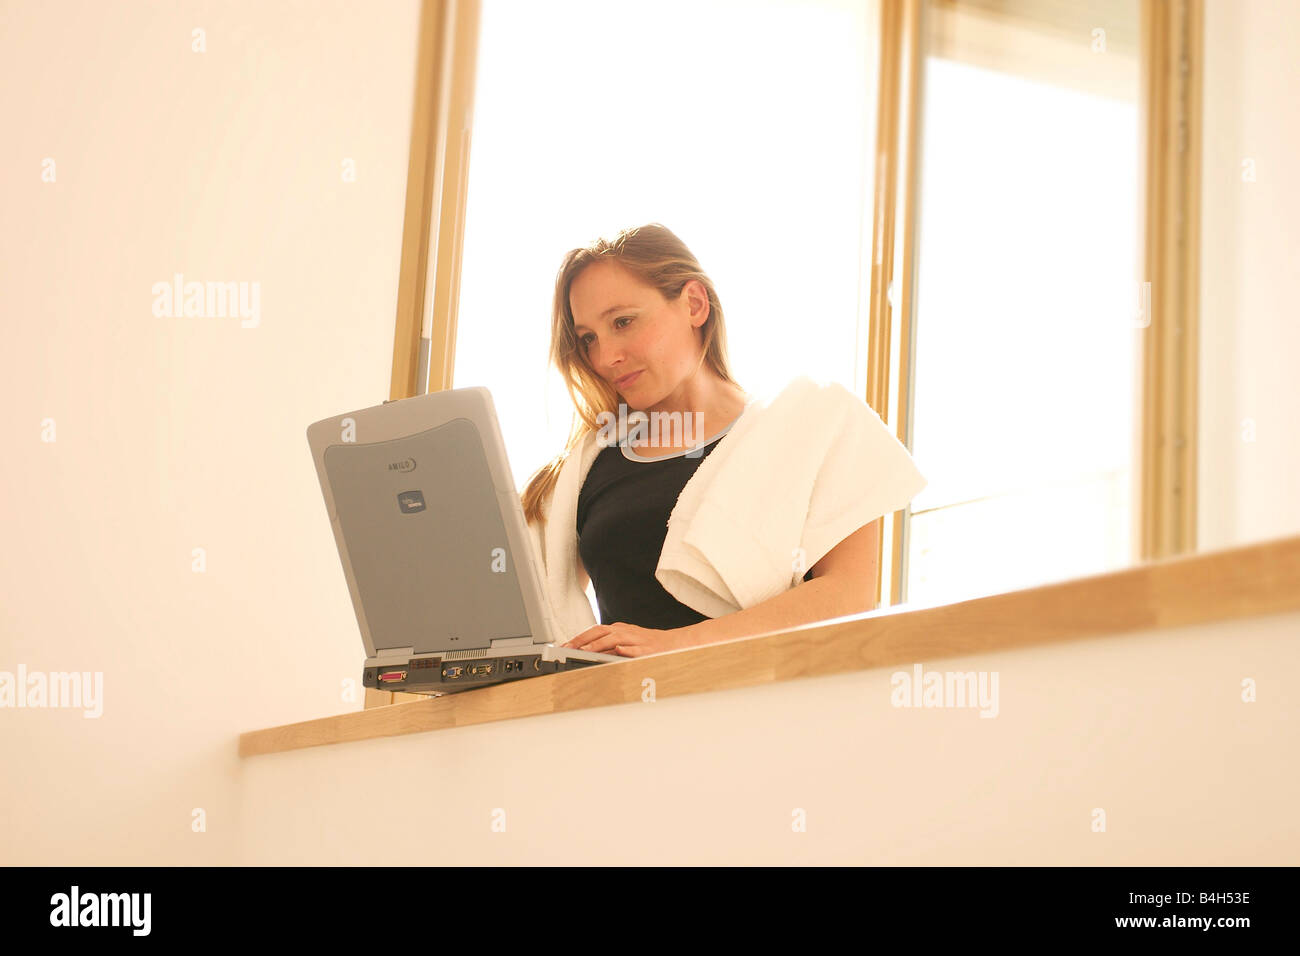 Low angle view of young woman working on laptop Banque D'Images